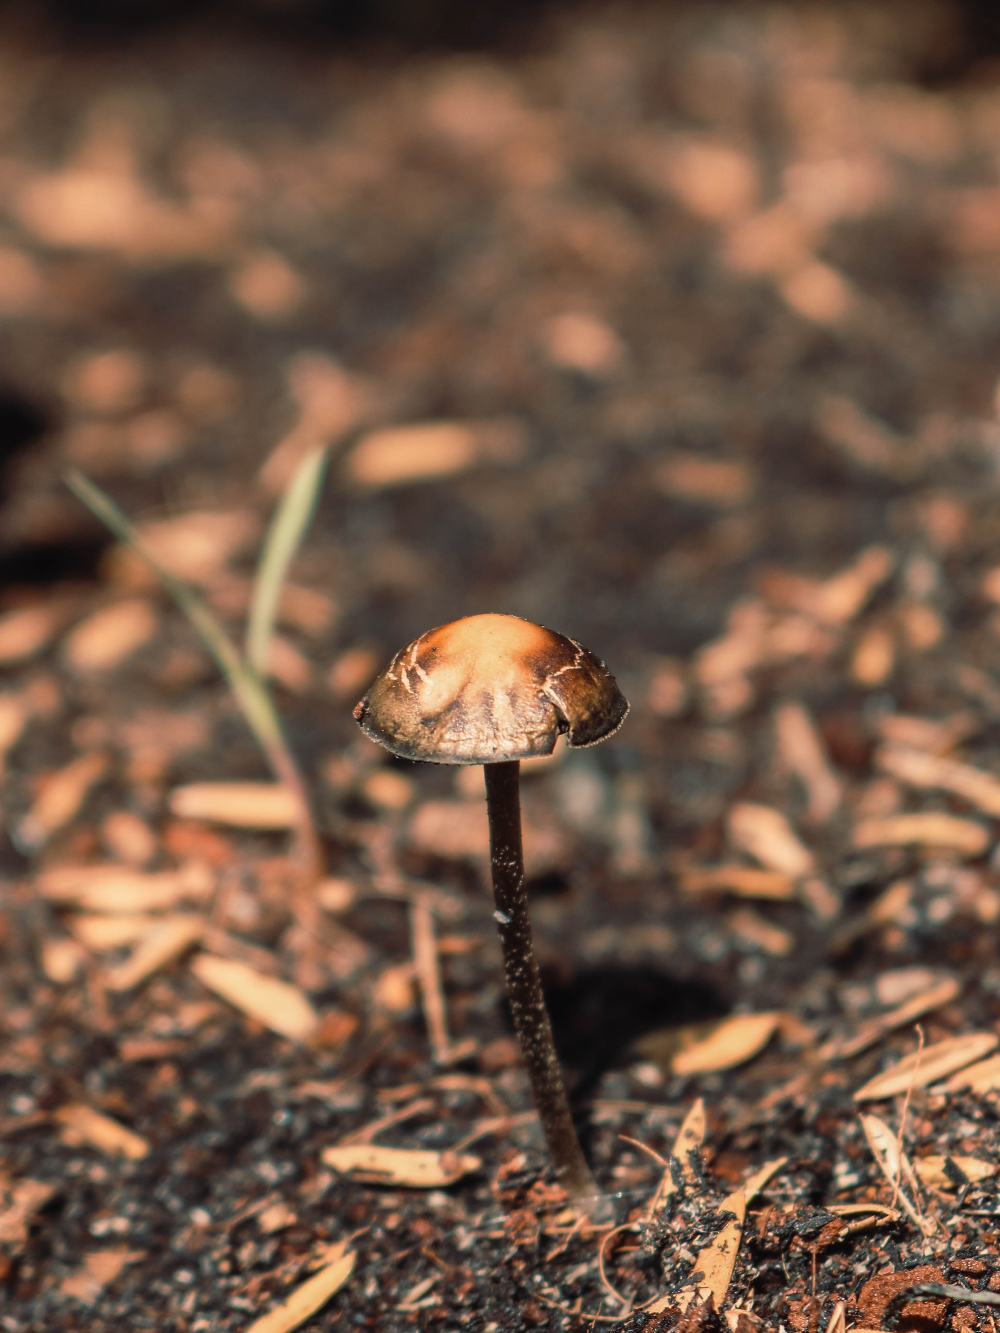 Psilocybin Could Provide Hope for Treatment Resistant Depression